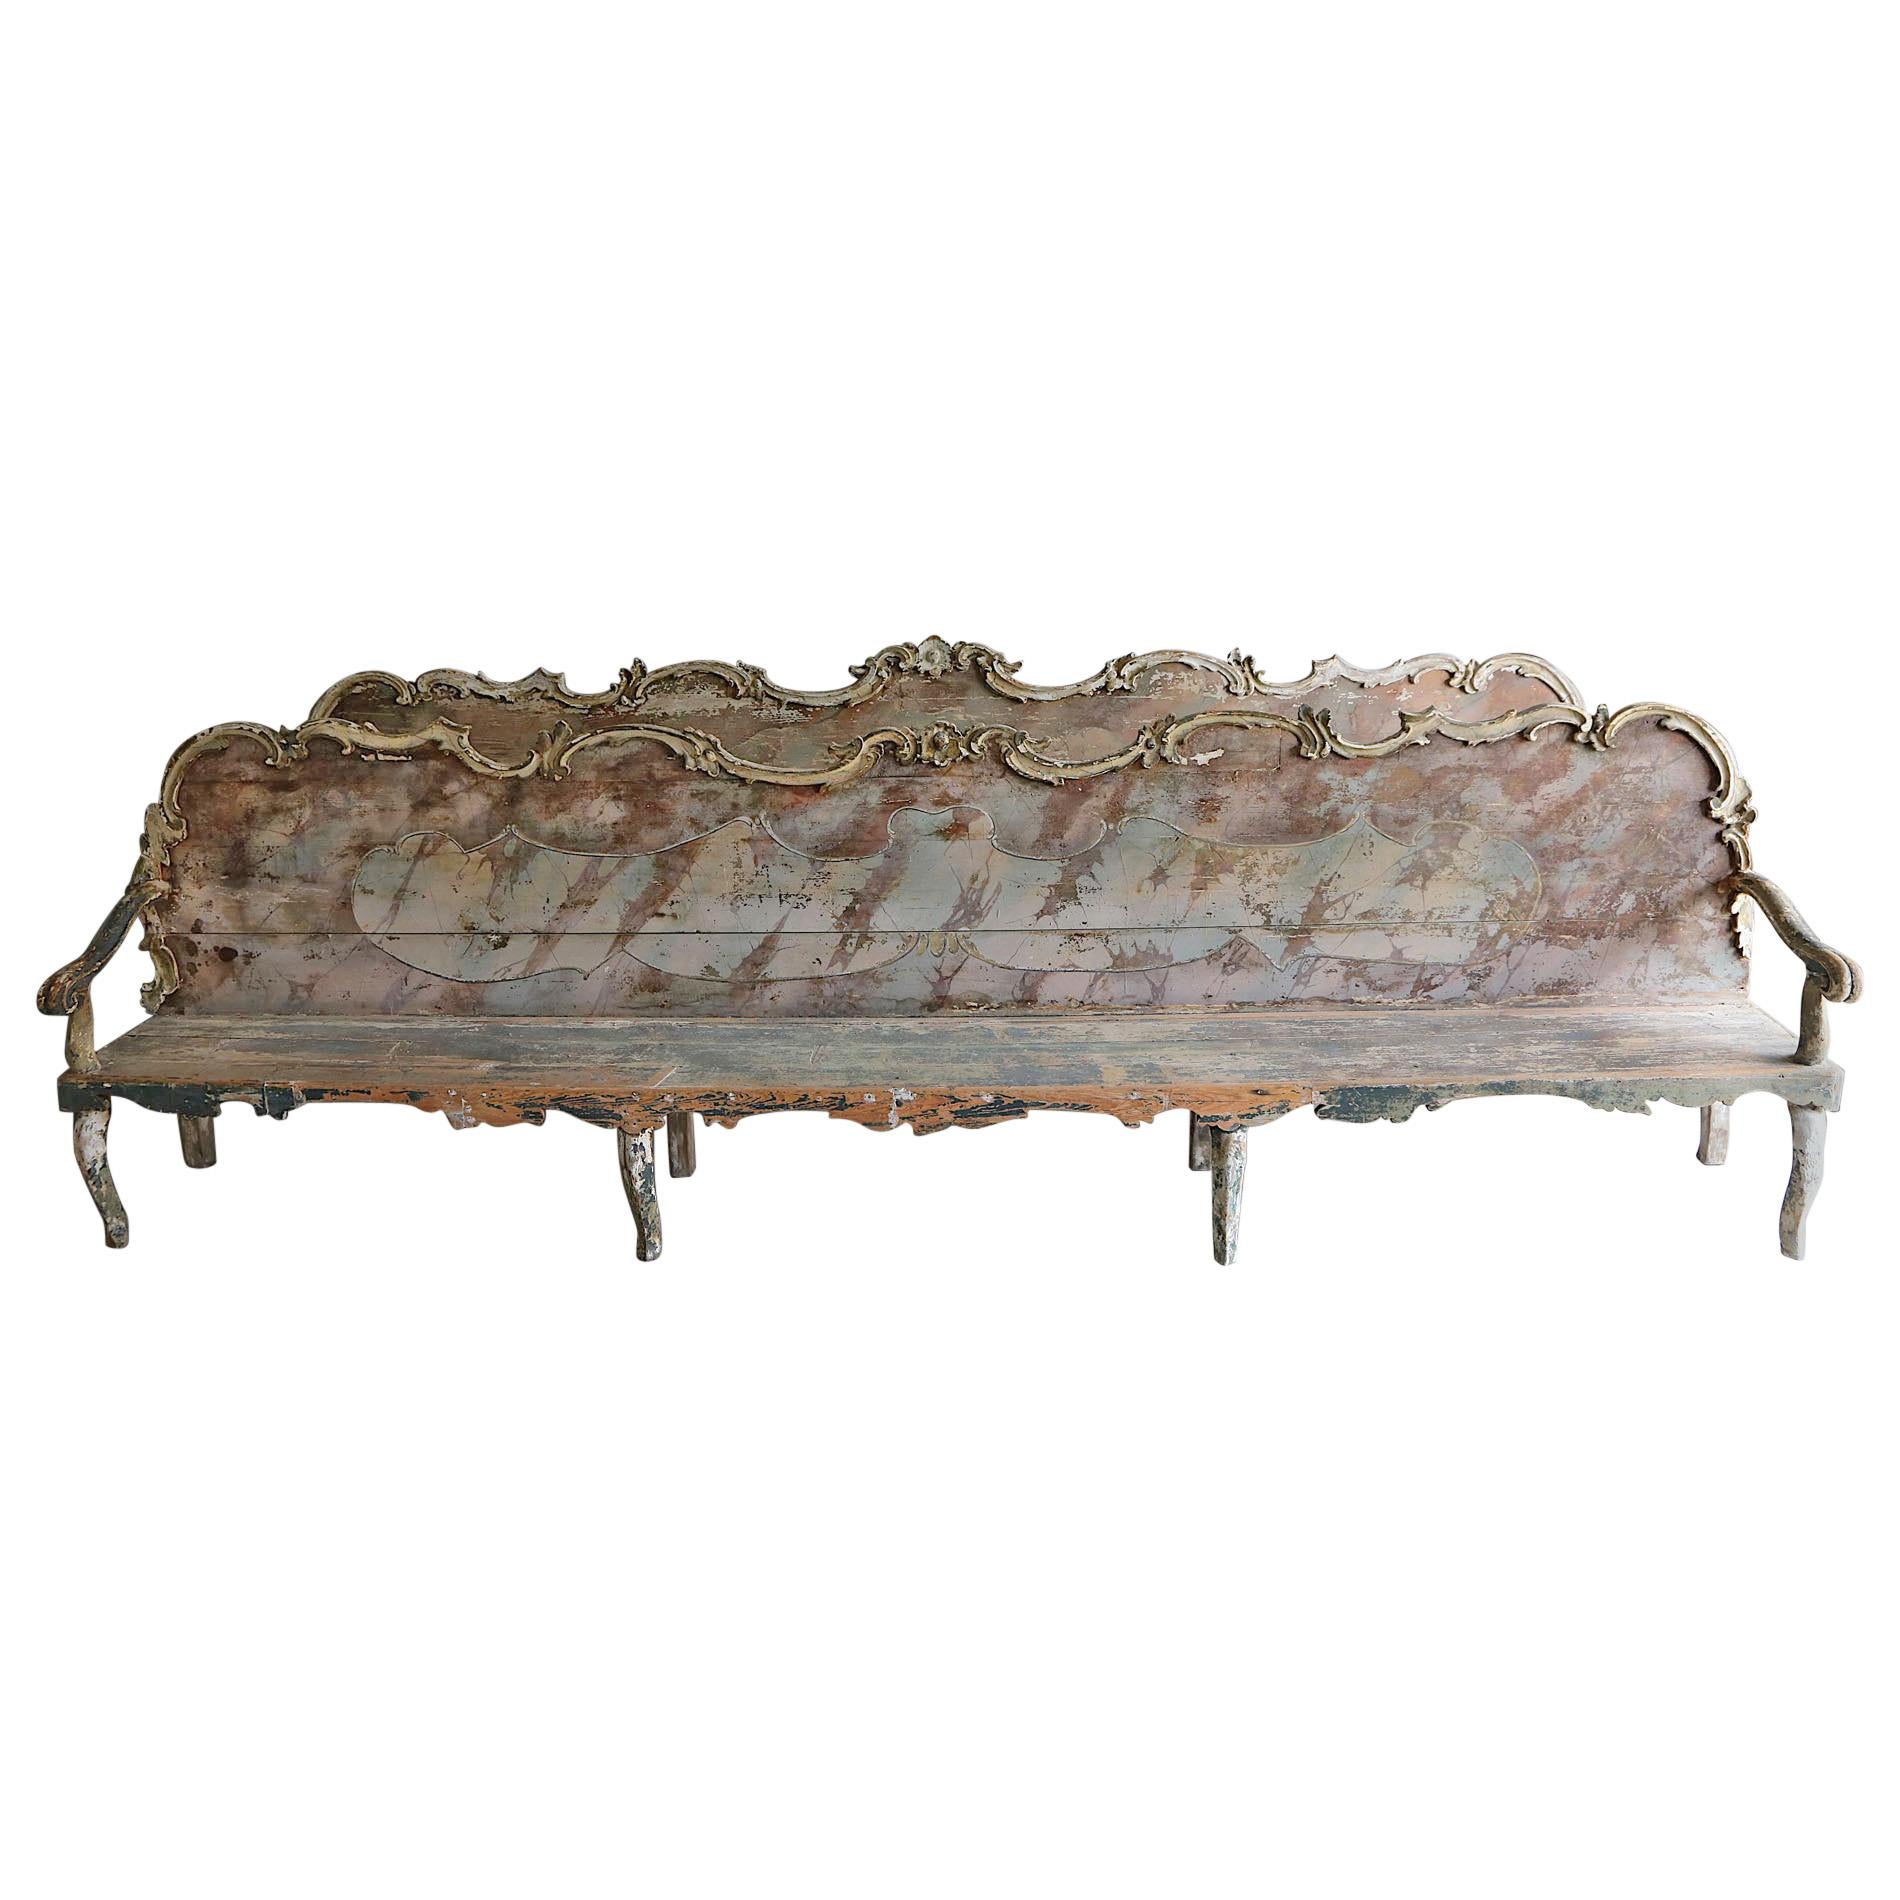  Monumental Grand Pair of 17thC Early 18th Century Italian Baroque Benches For Sale